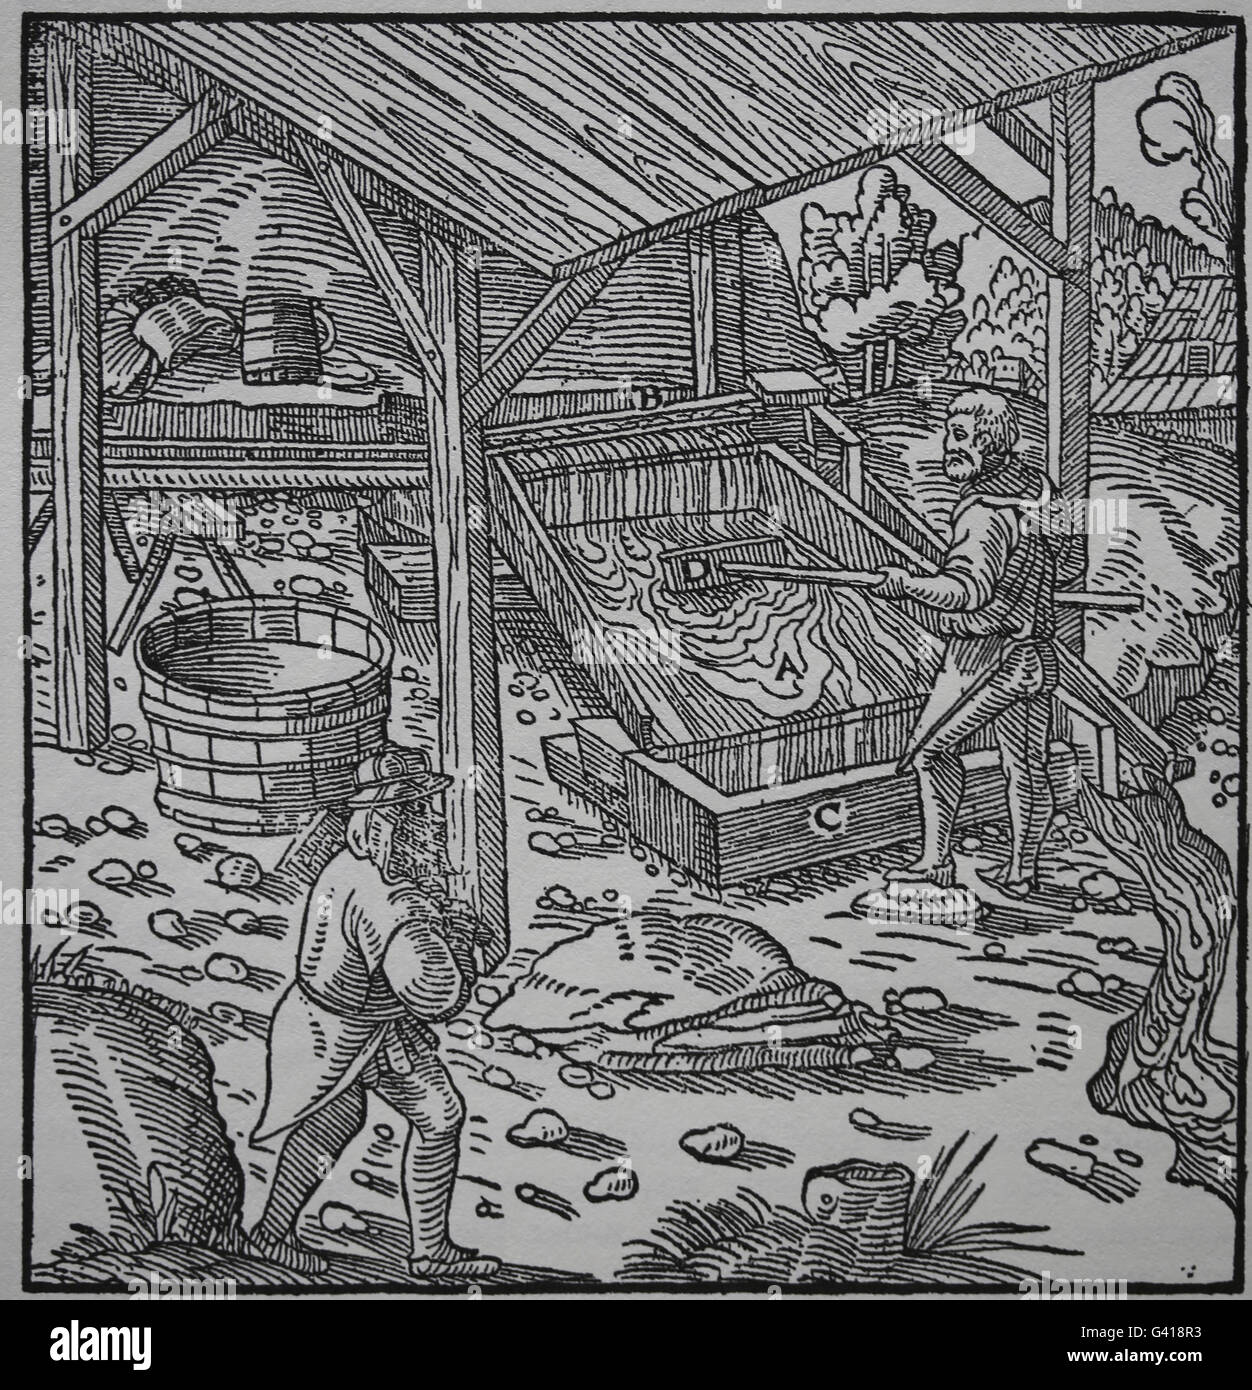 George Agricola (1494-1555) . Book De Re Metallica, 1556. Book VIII. Extract and washed the metals. Engraving. Stock Photo